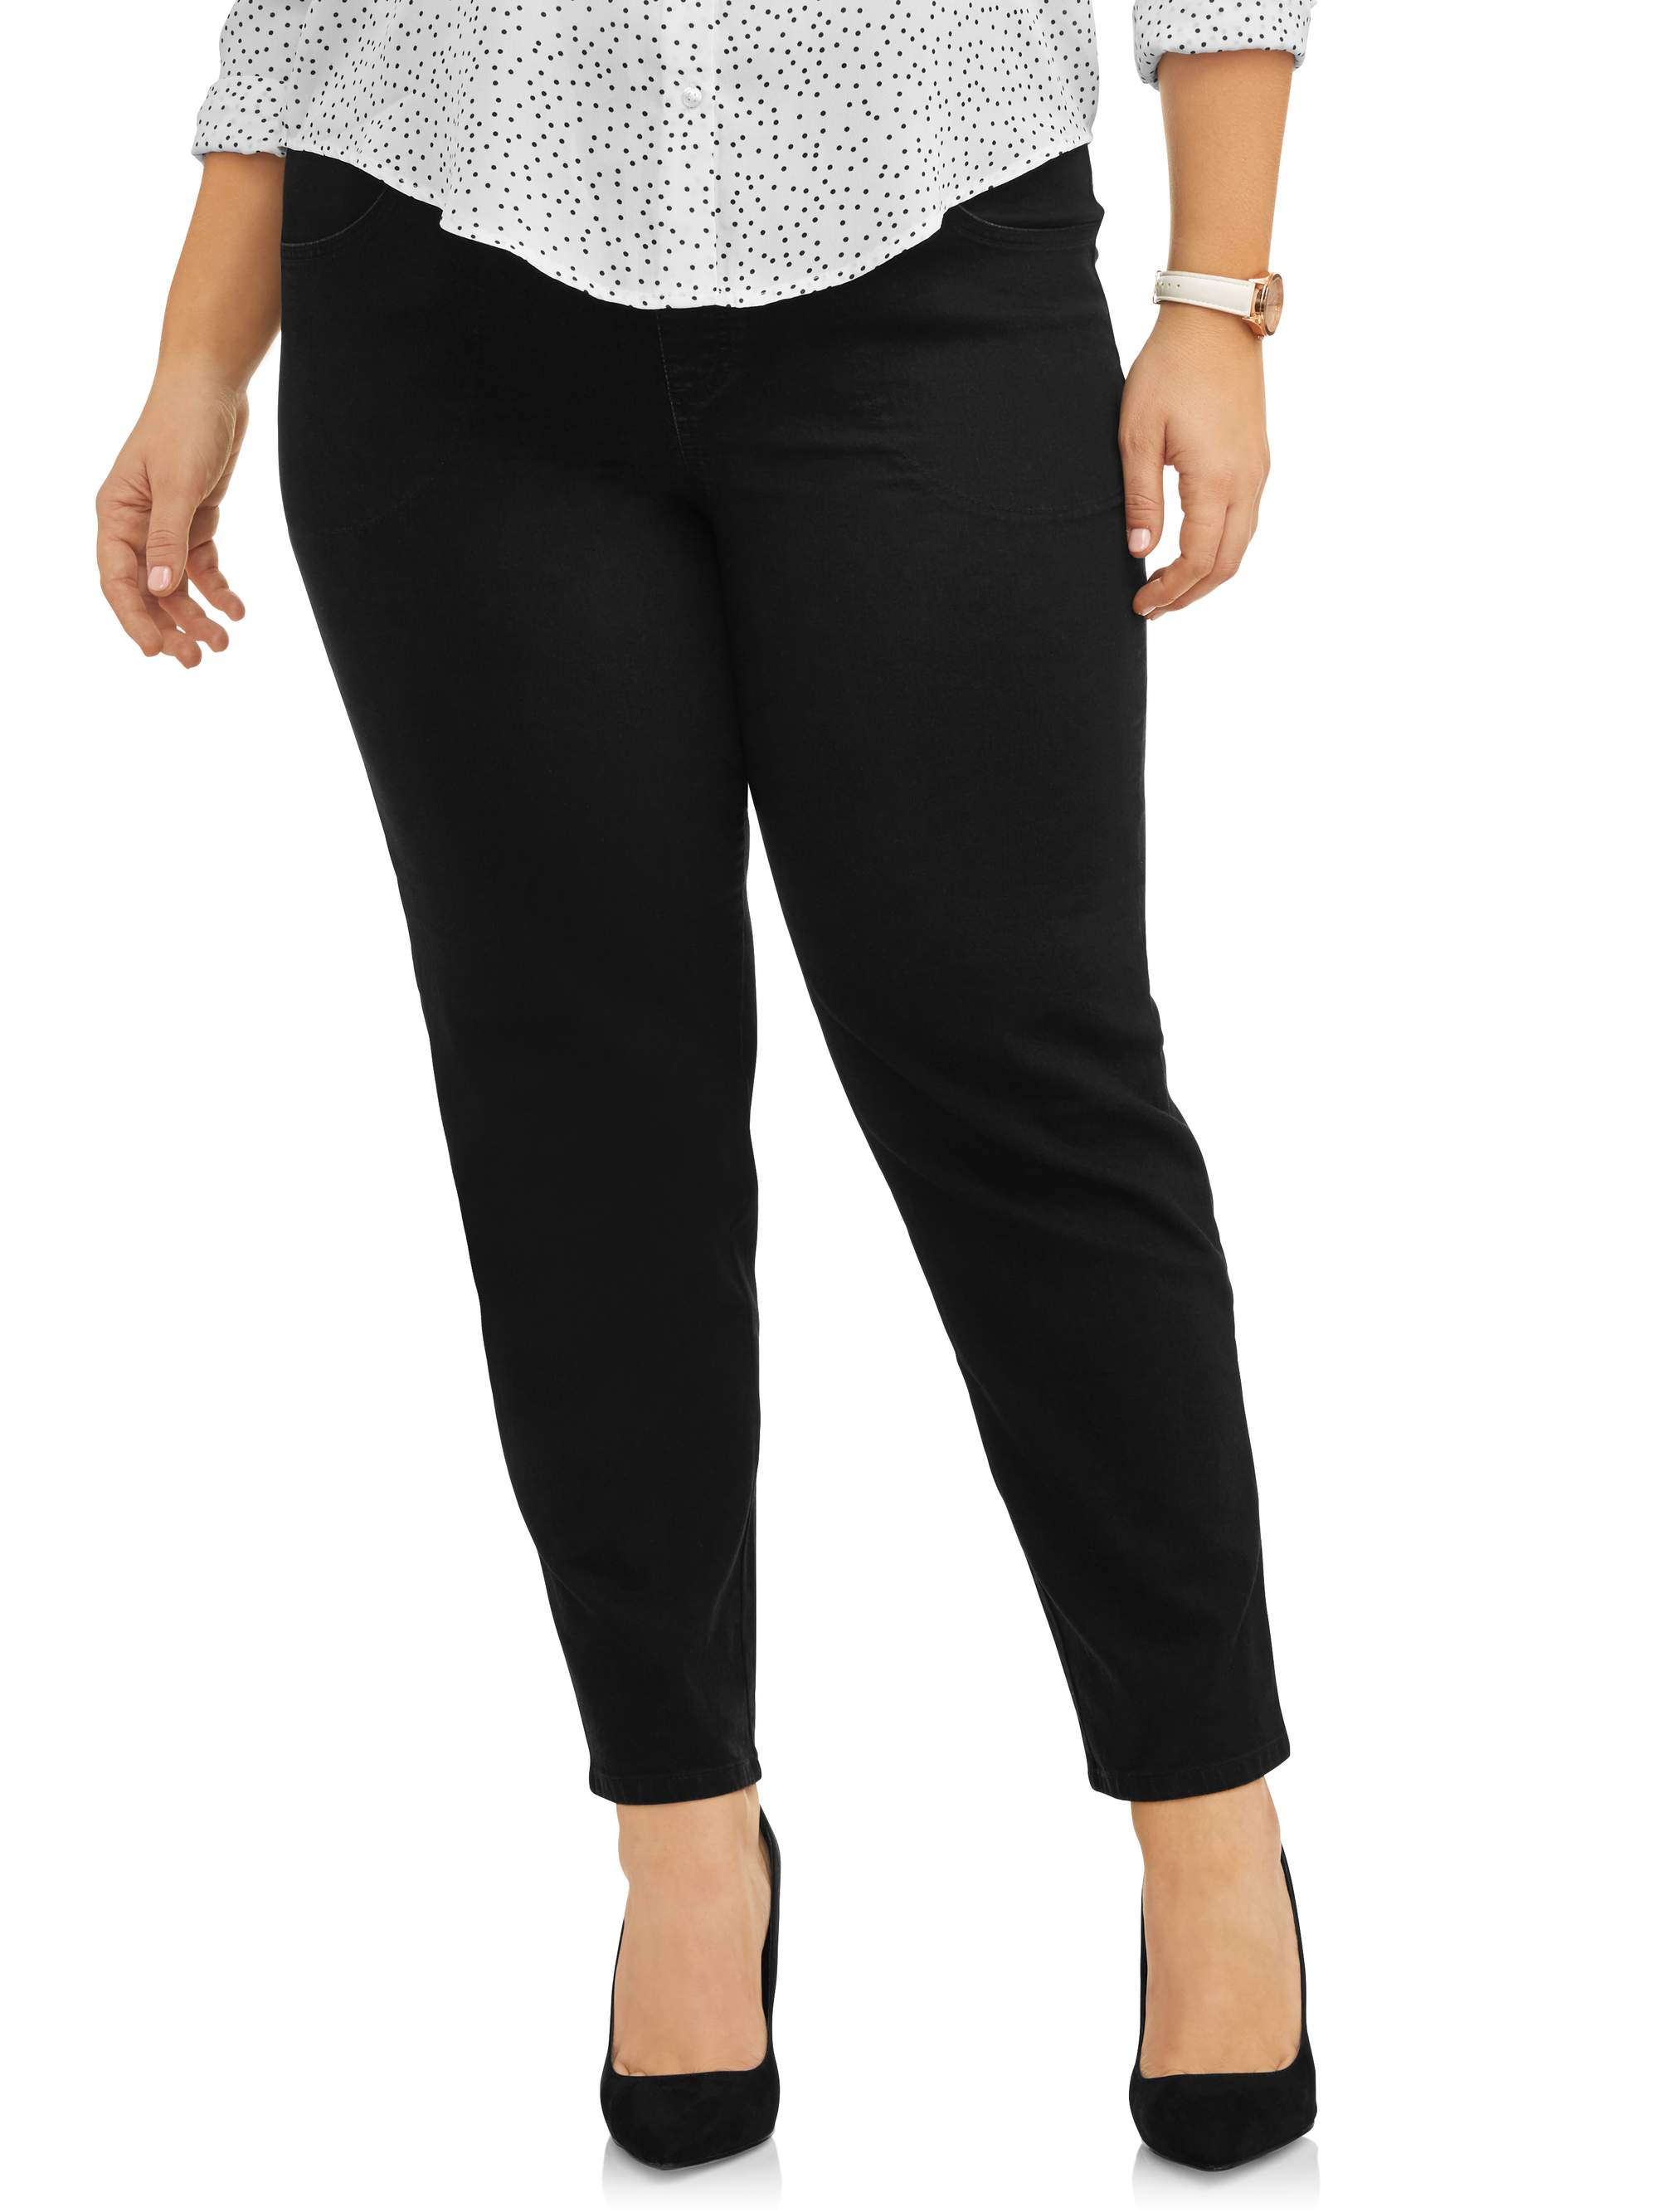 Just My Size Women's Plus 2 Pocket Pull-On Pant - image 1 of 8